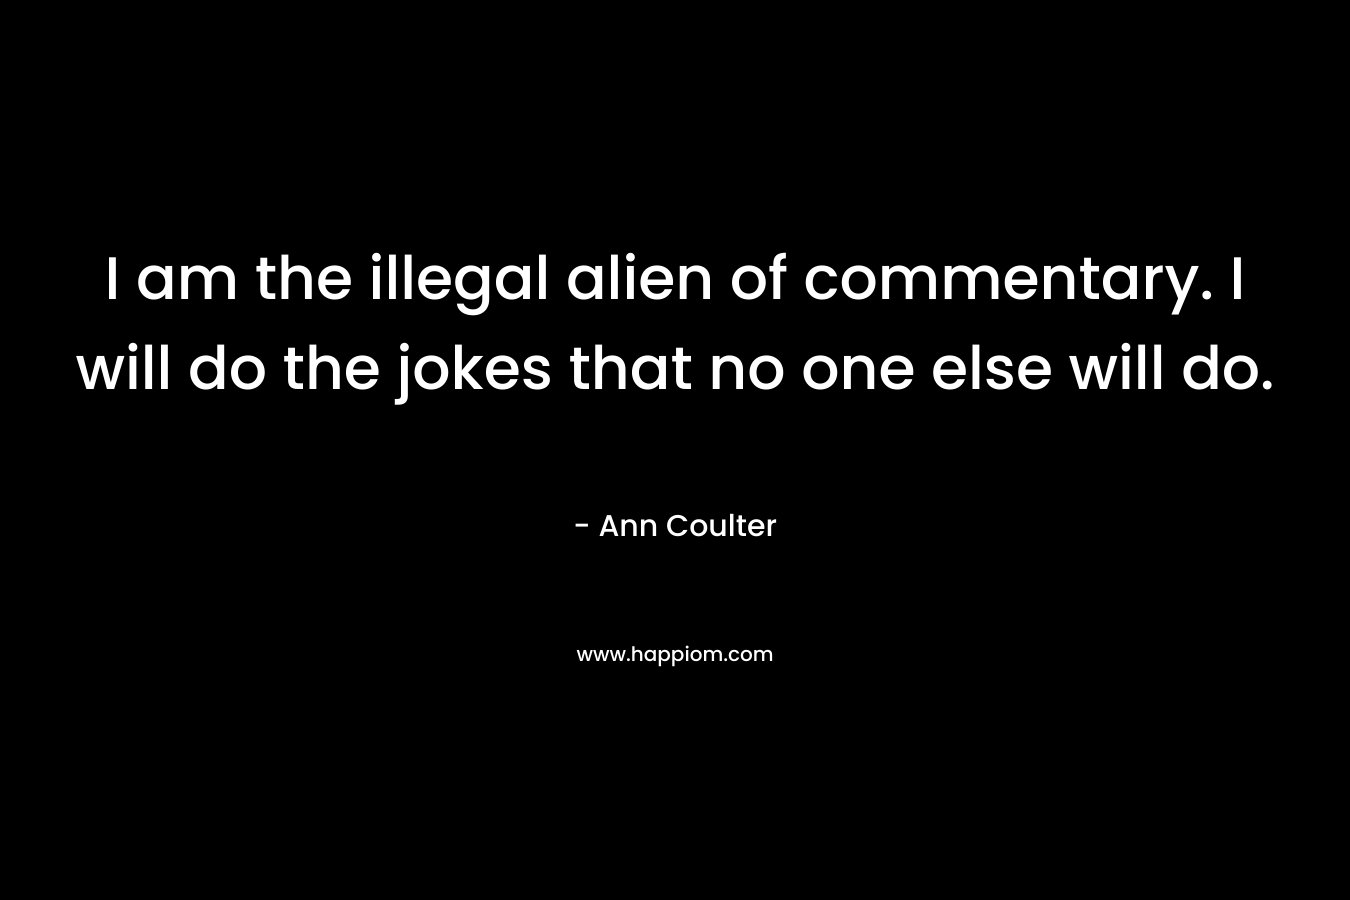 I am the illegal alien of commentary. I will do the jokes that no one else will do. – Ann Coulter